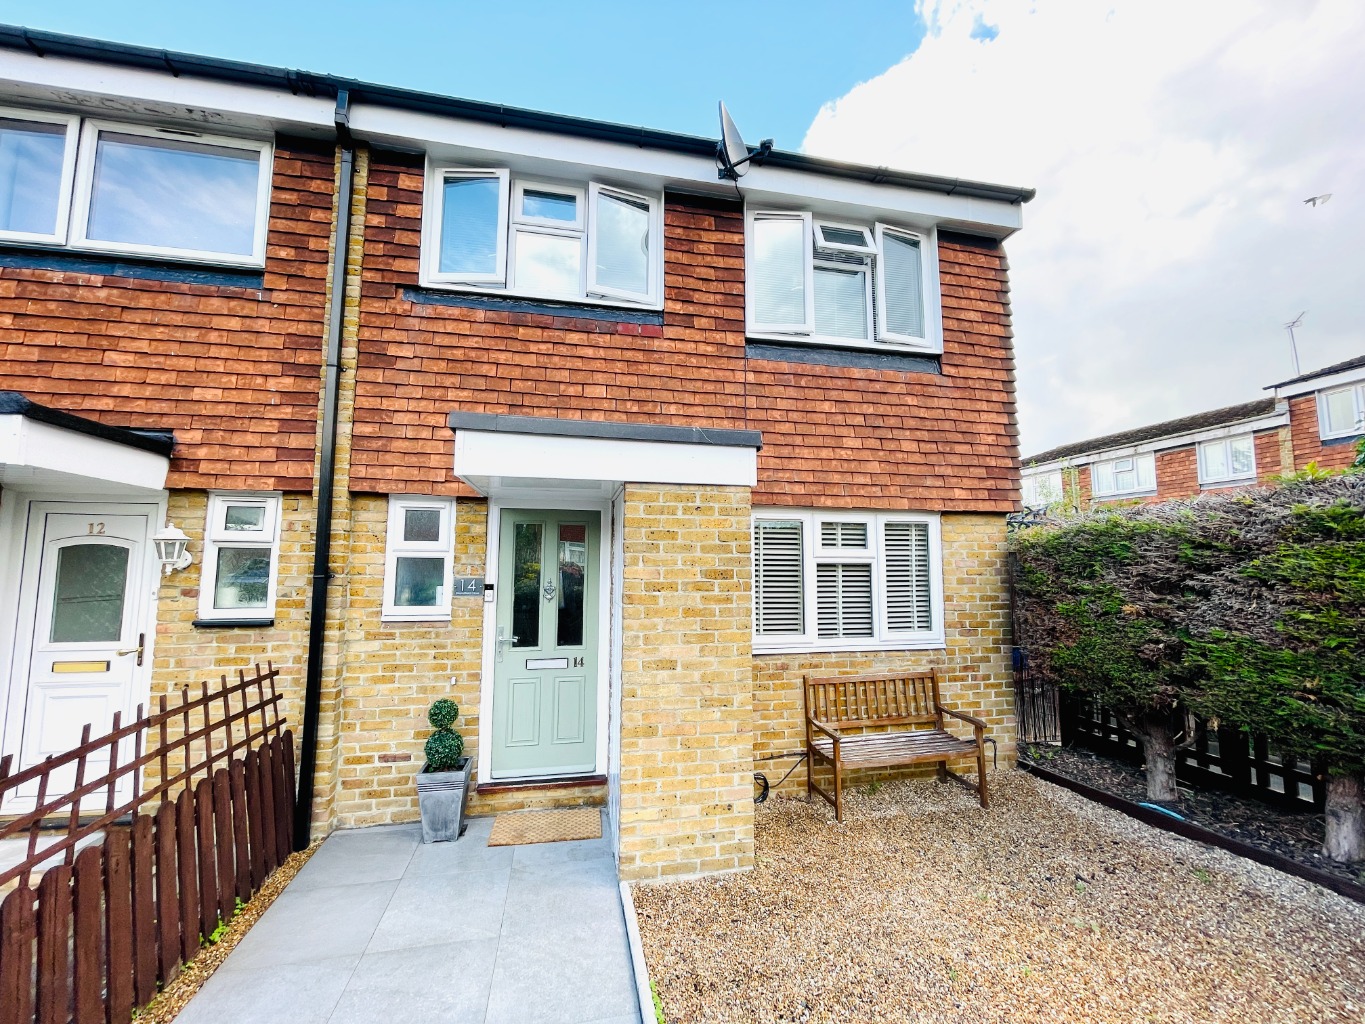 Beaumont Gibbs a pleased to offer for sale this three double bedroomed end of terrace family home for sale.